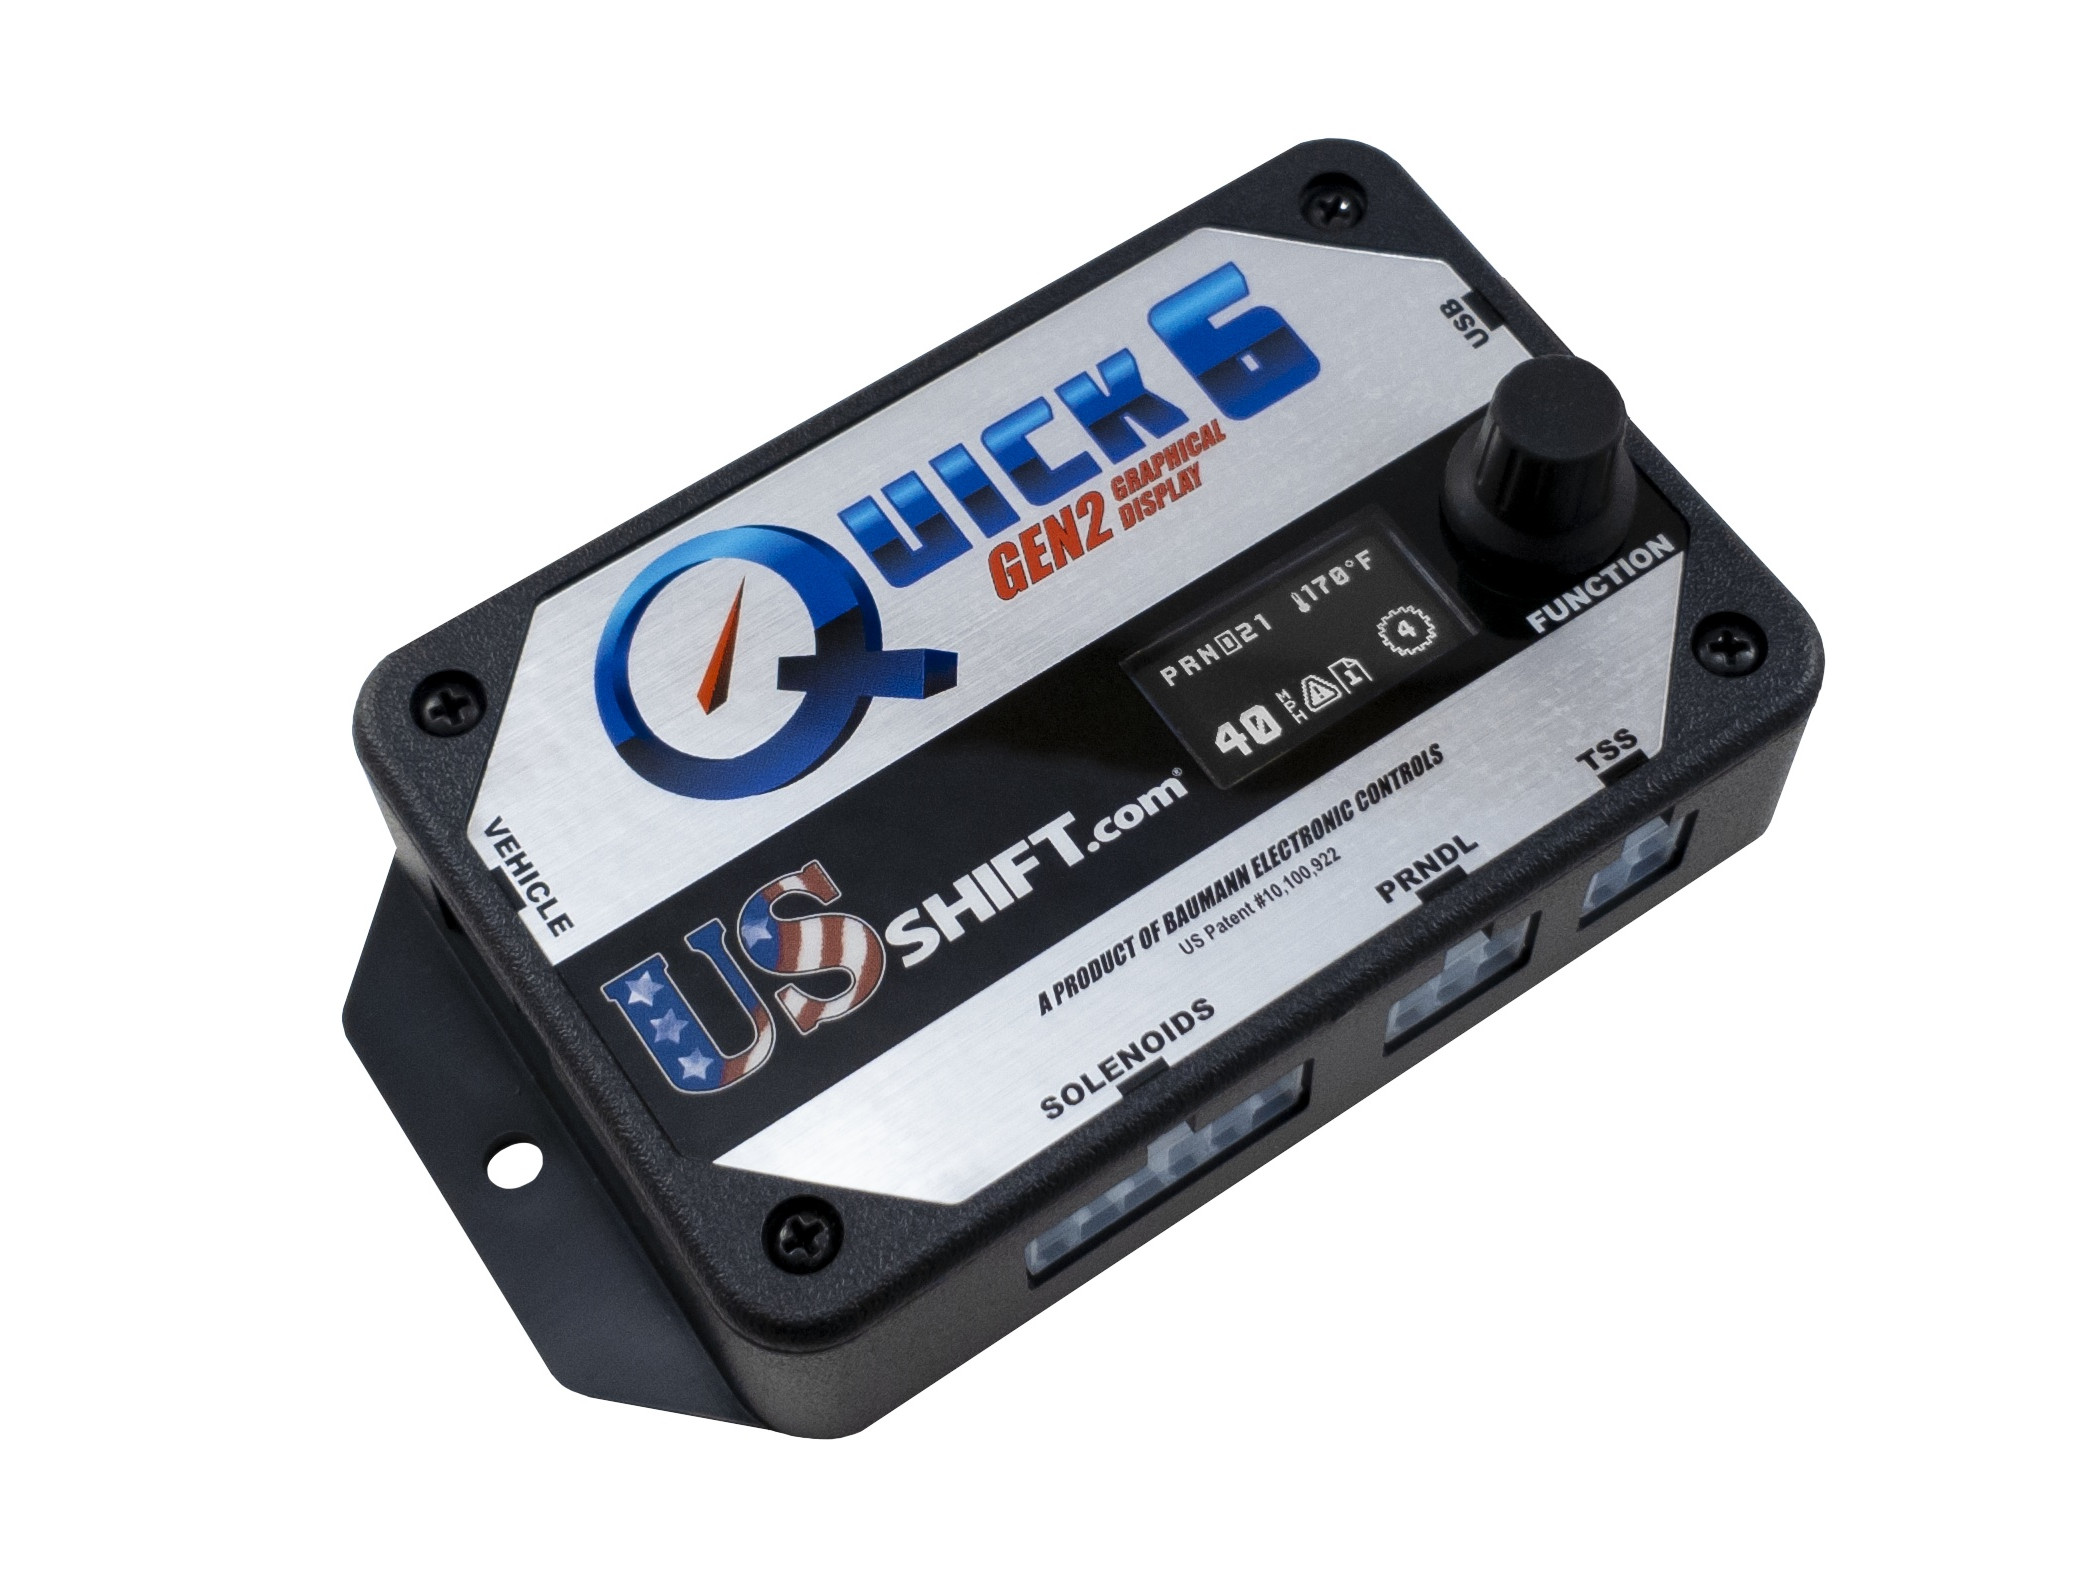 Quick 6 Clutch-to-Clutch Transmission Controller